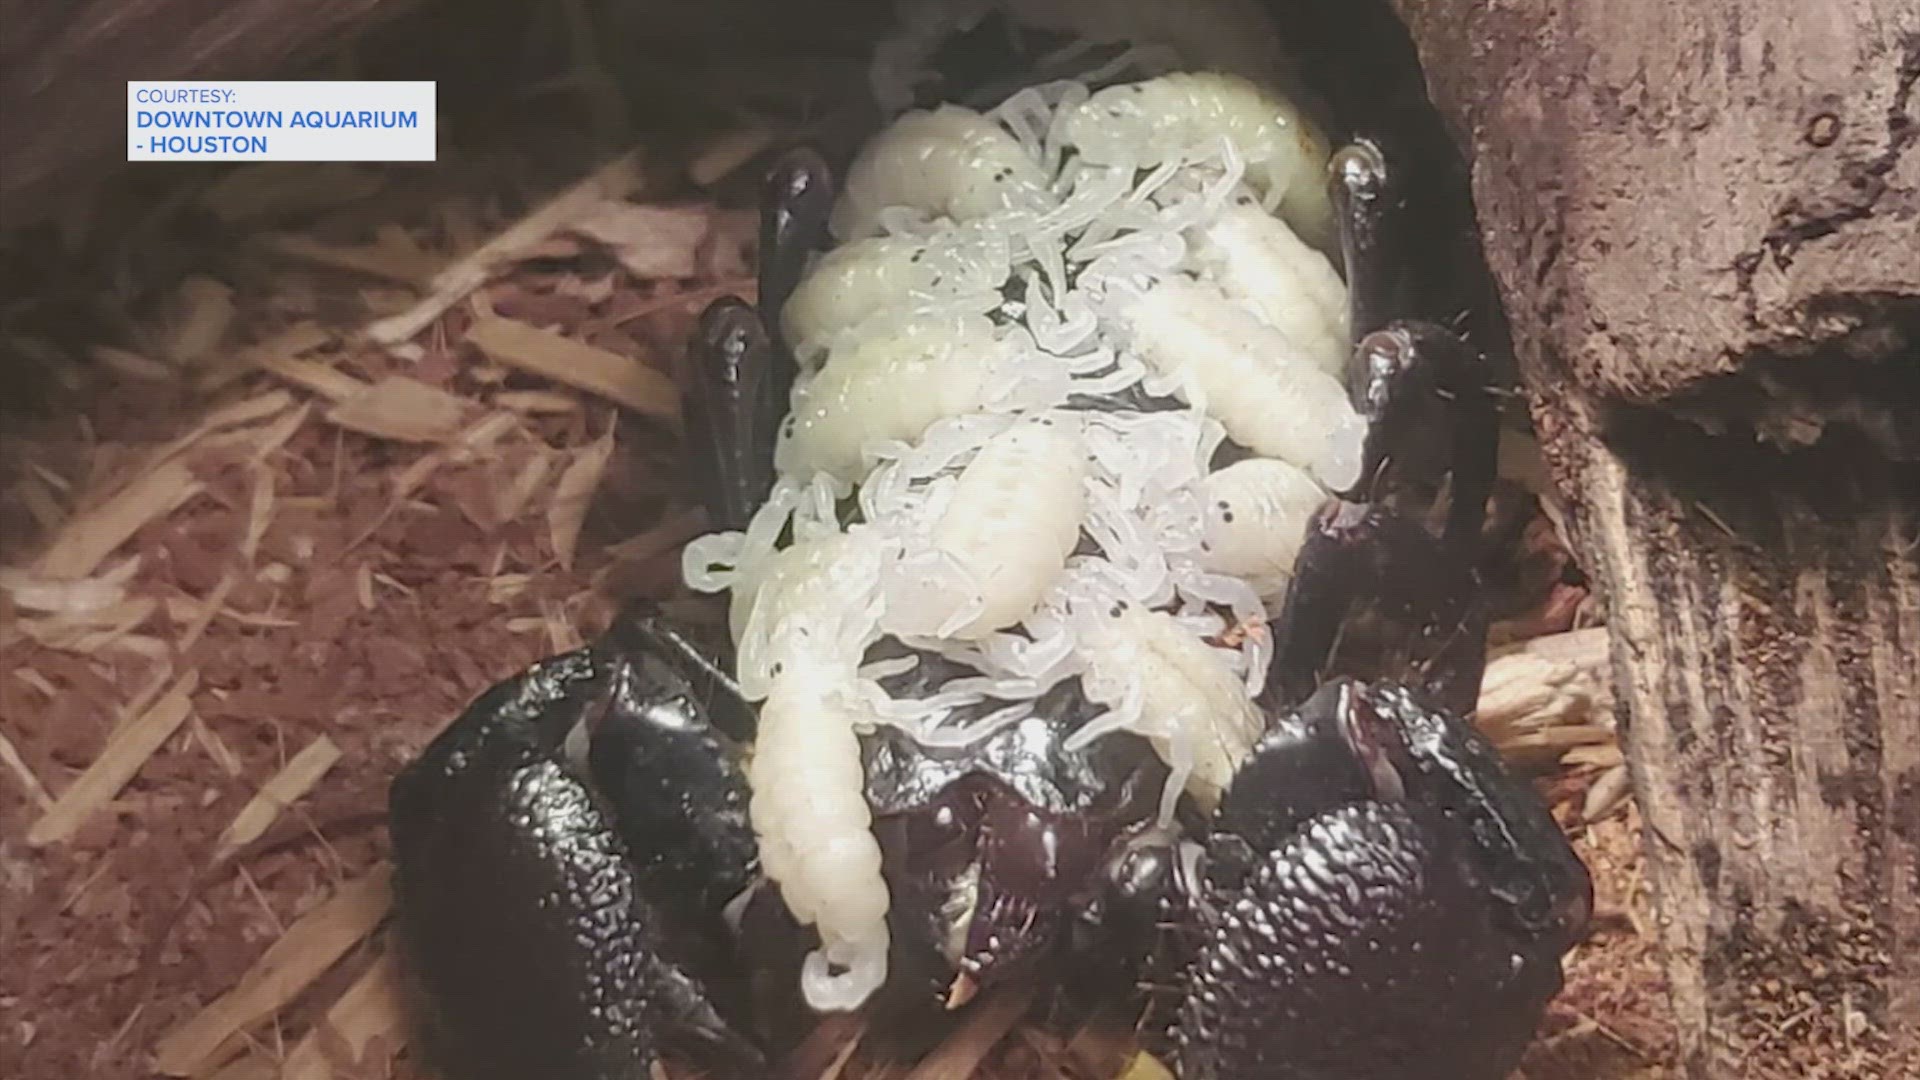 The emperor scorpion gave birth at the Downtown Aquarium.  The babies will stay on mom's back for a few weeks.